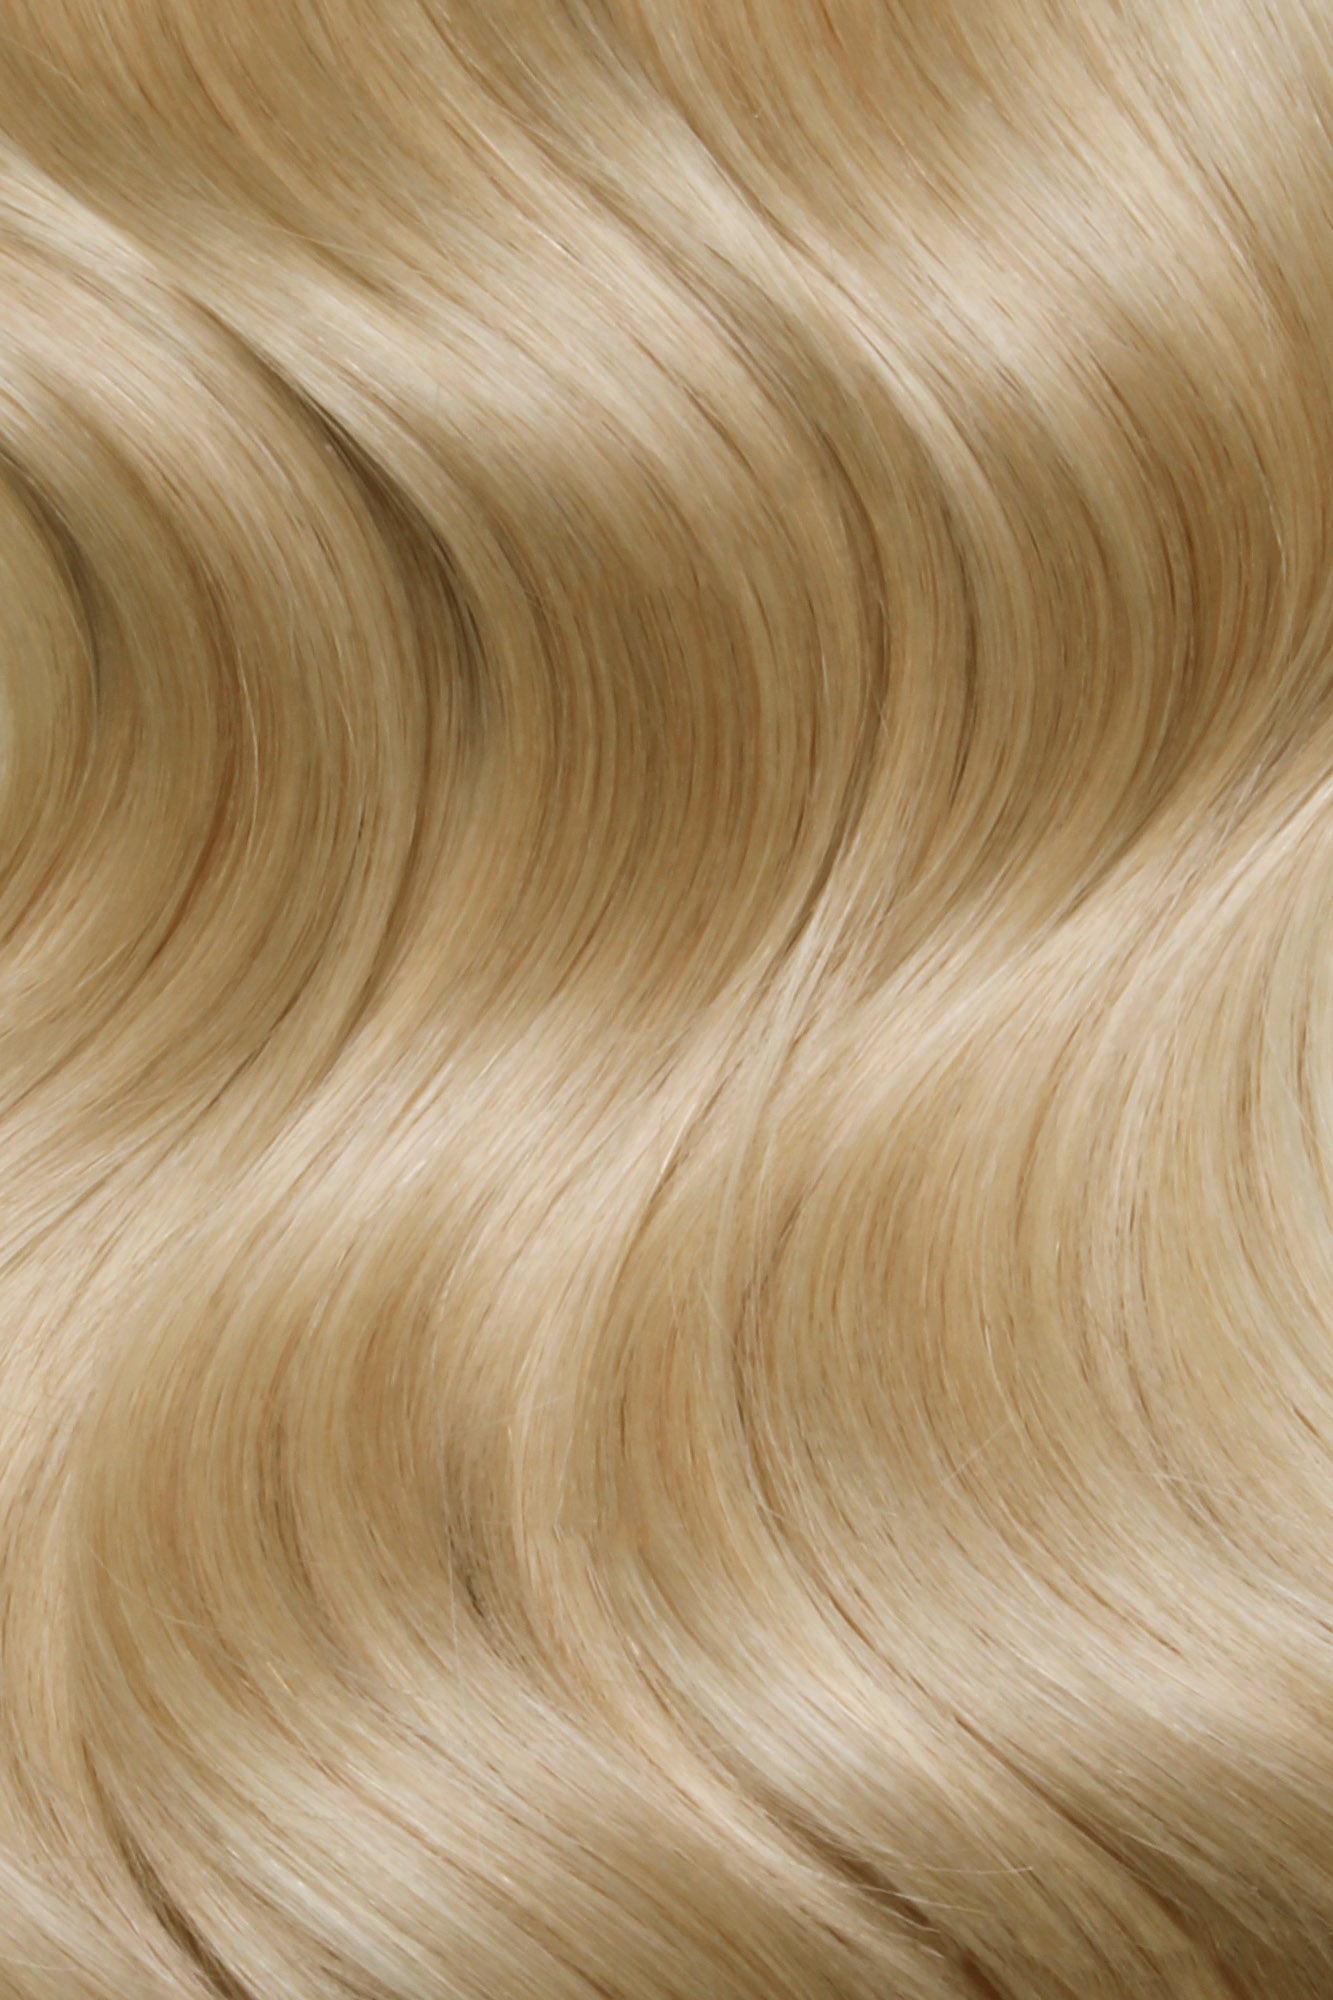 Nano Bonds 24 Inches - SWAY Hair Extensions Natural-Ash-Blonde-20 Ultra-fine, invisible bonds for a flawless, natural look. 100% Remy Human hair, lightweight and versatile. Reusable and perfect for individual or salon use.